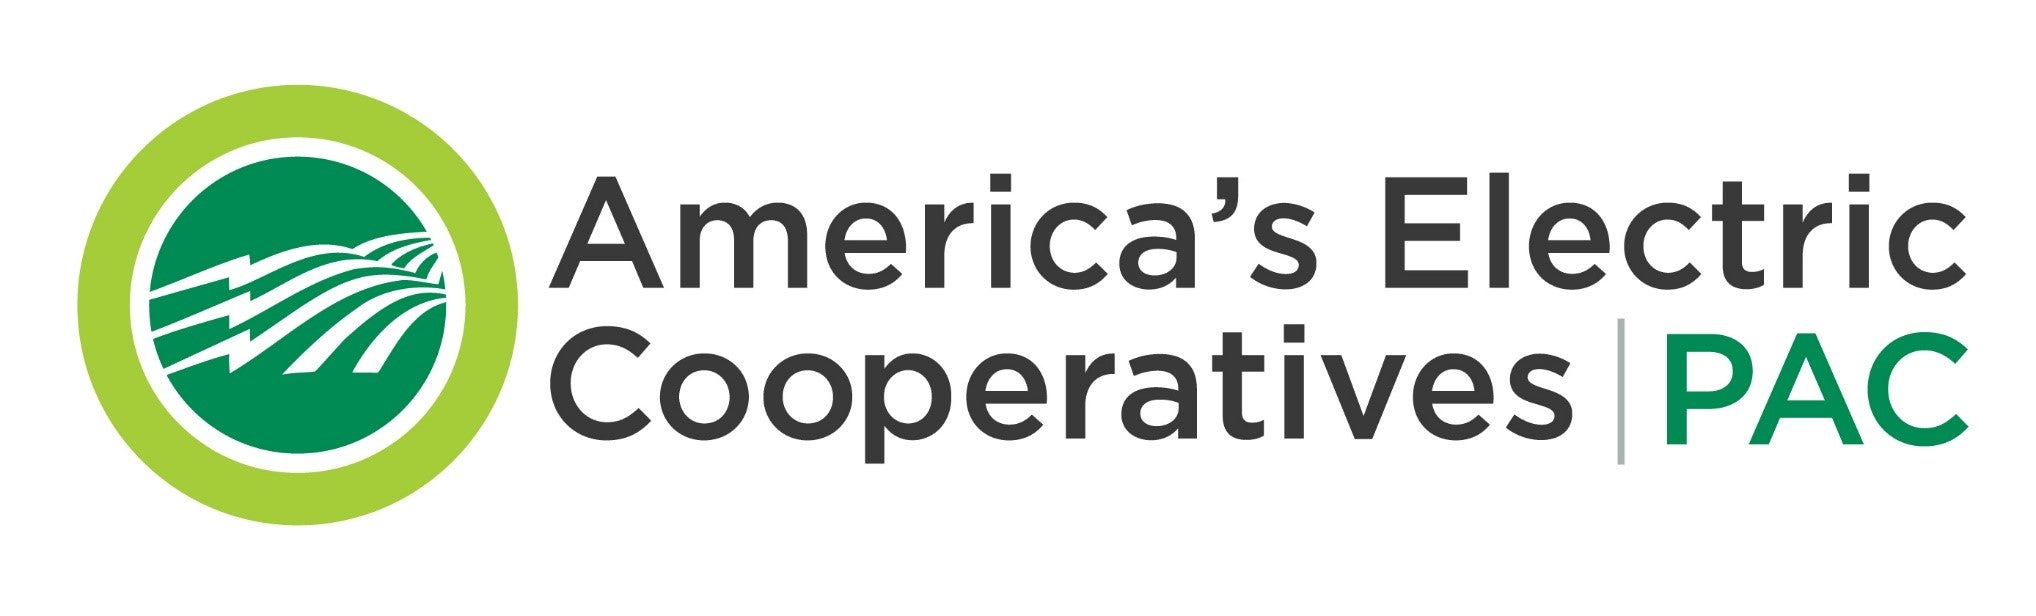 Logo for America's Electric Cooperative PAC, click to learn more